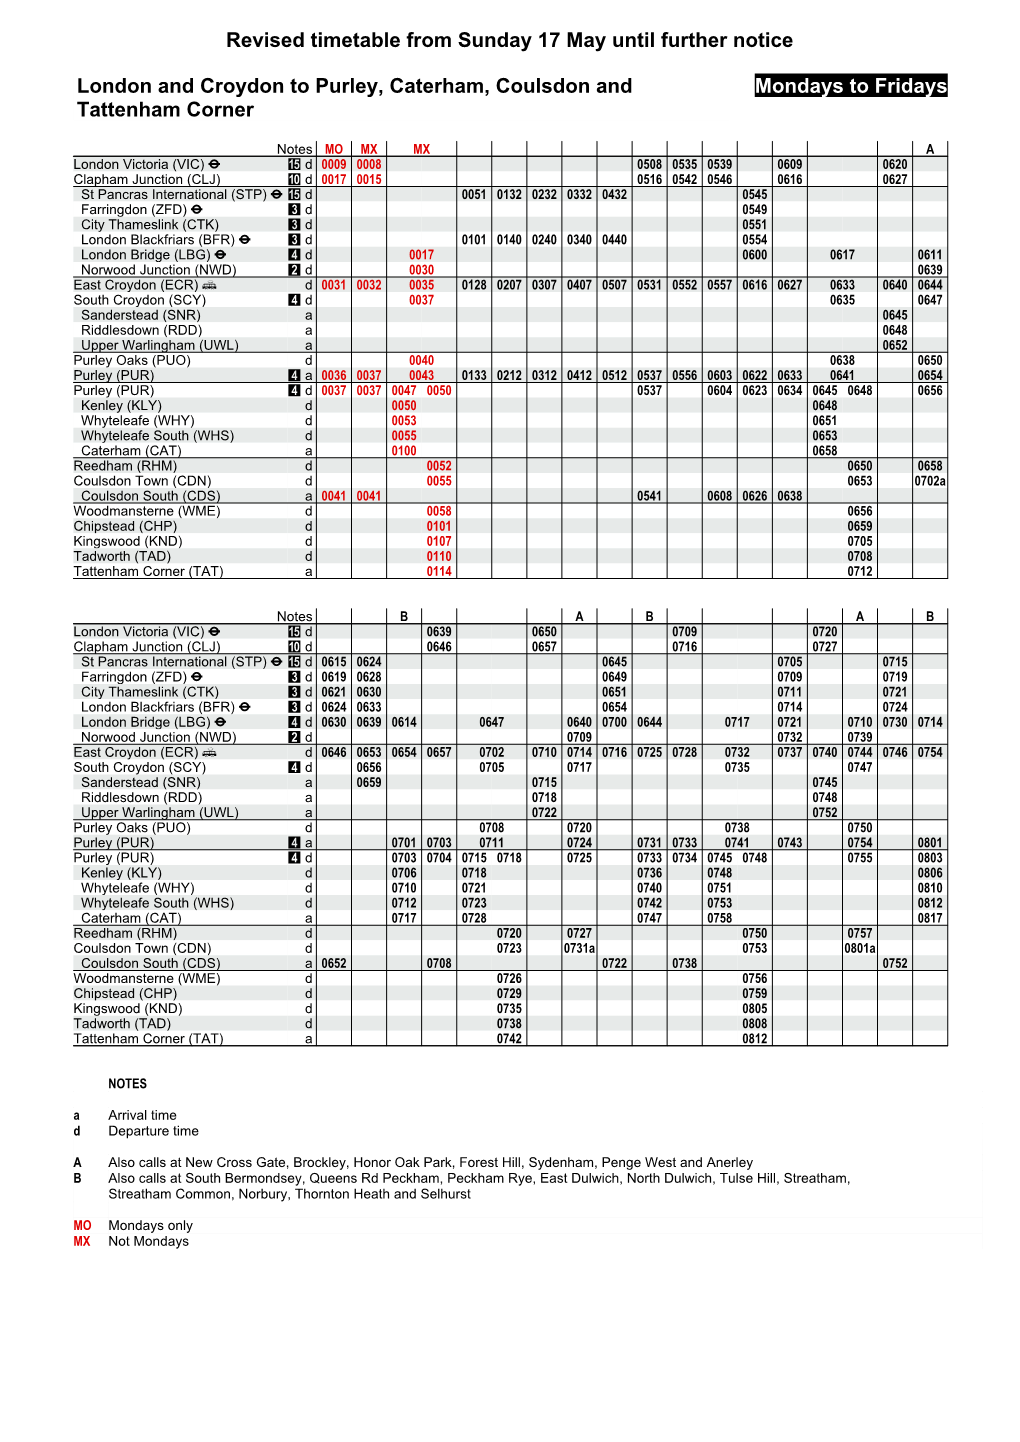 Revised Timetable from Sunday 17 May Until Further Notice